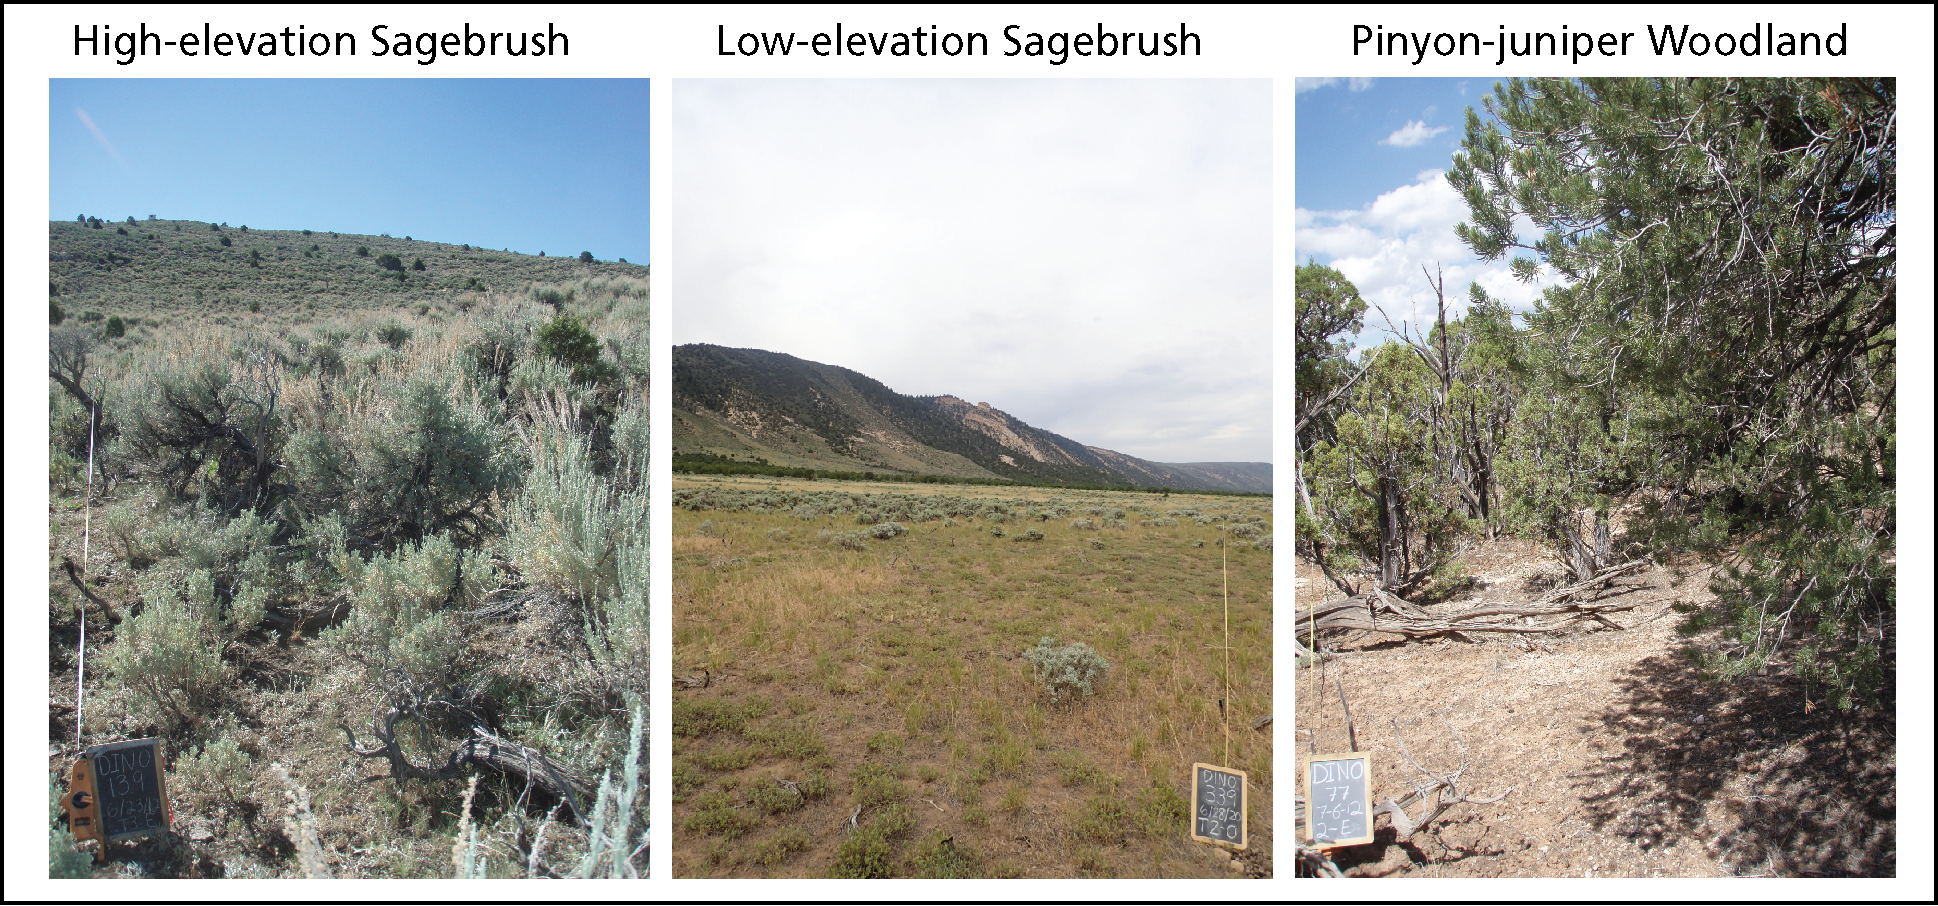 Pinyon-juniper woodlands, and high-elevation and low-elevation sagebrush images are shown in a collage of three separate photos.